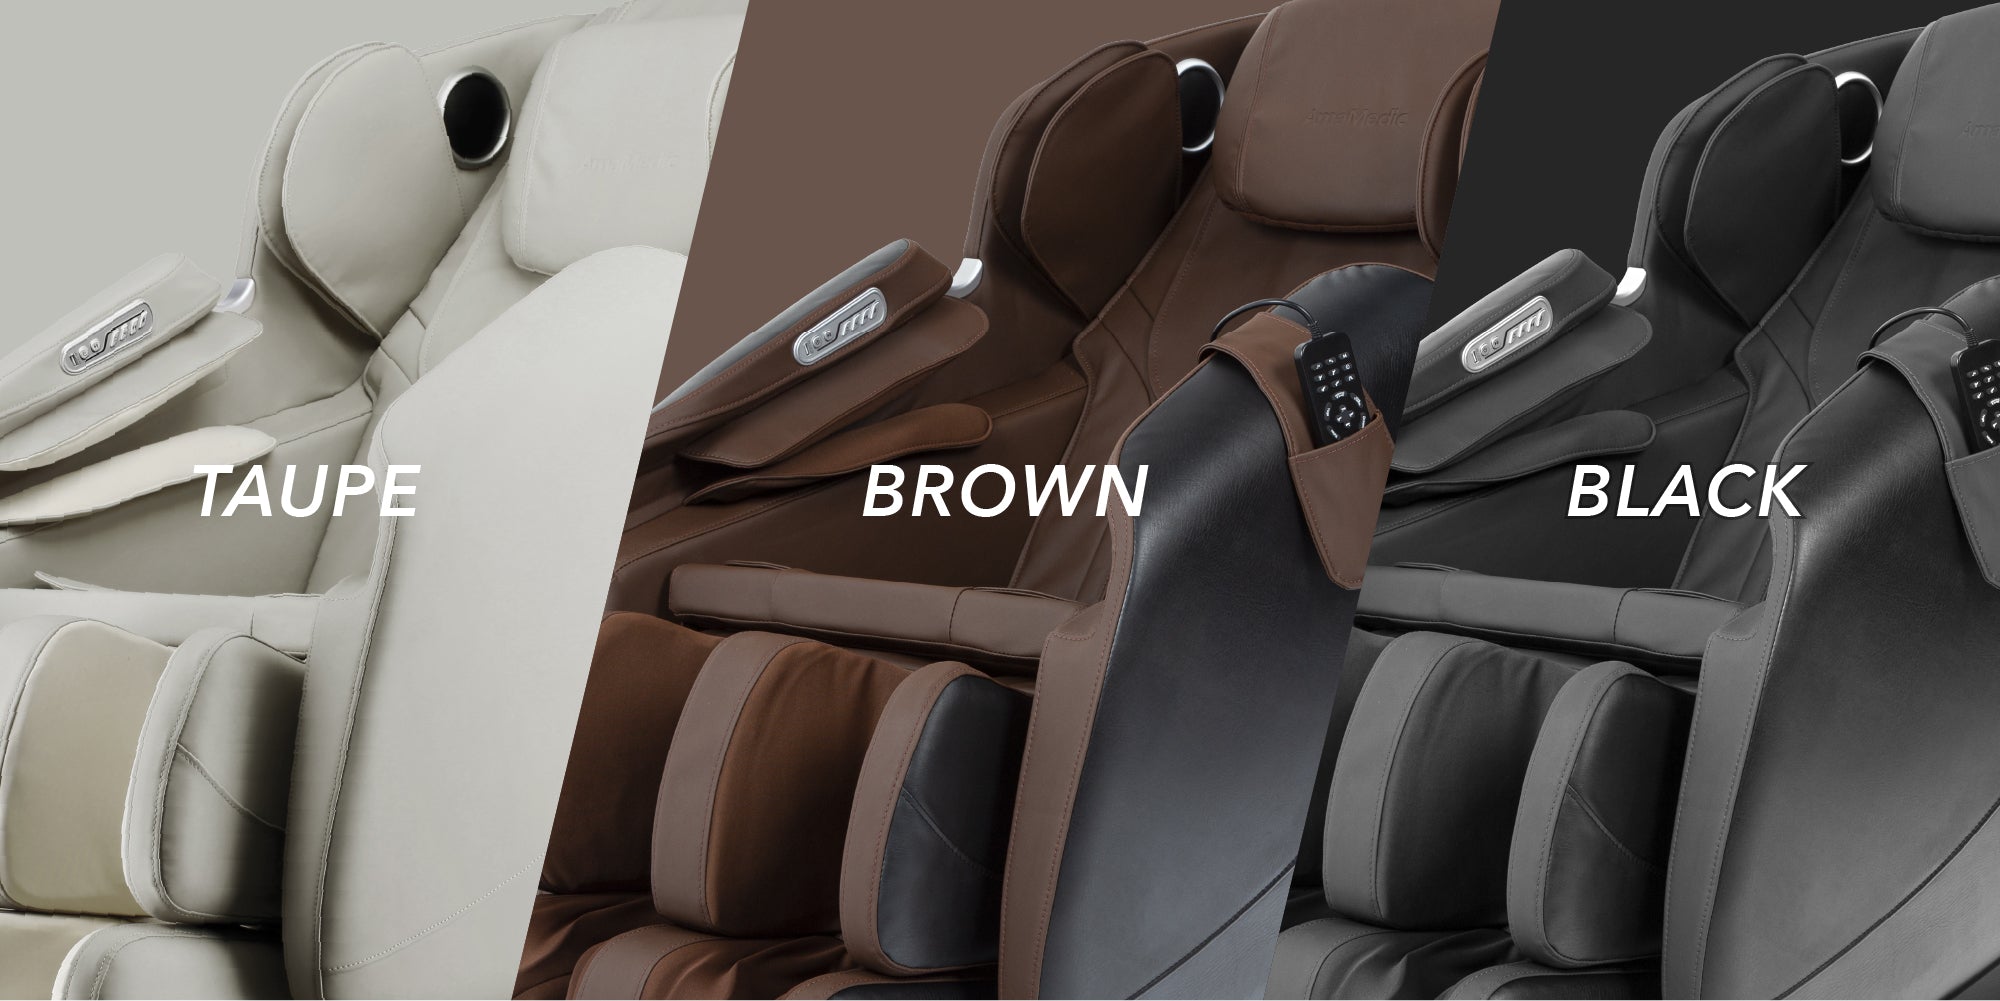 R7's Colors : Taupe, Brown, Black